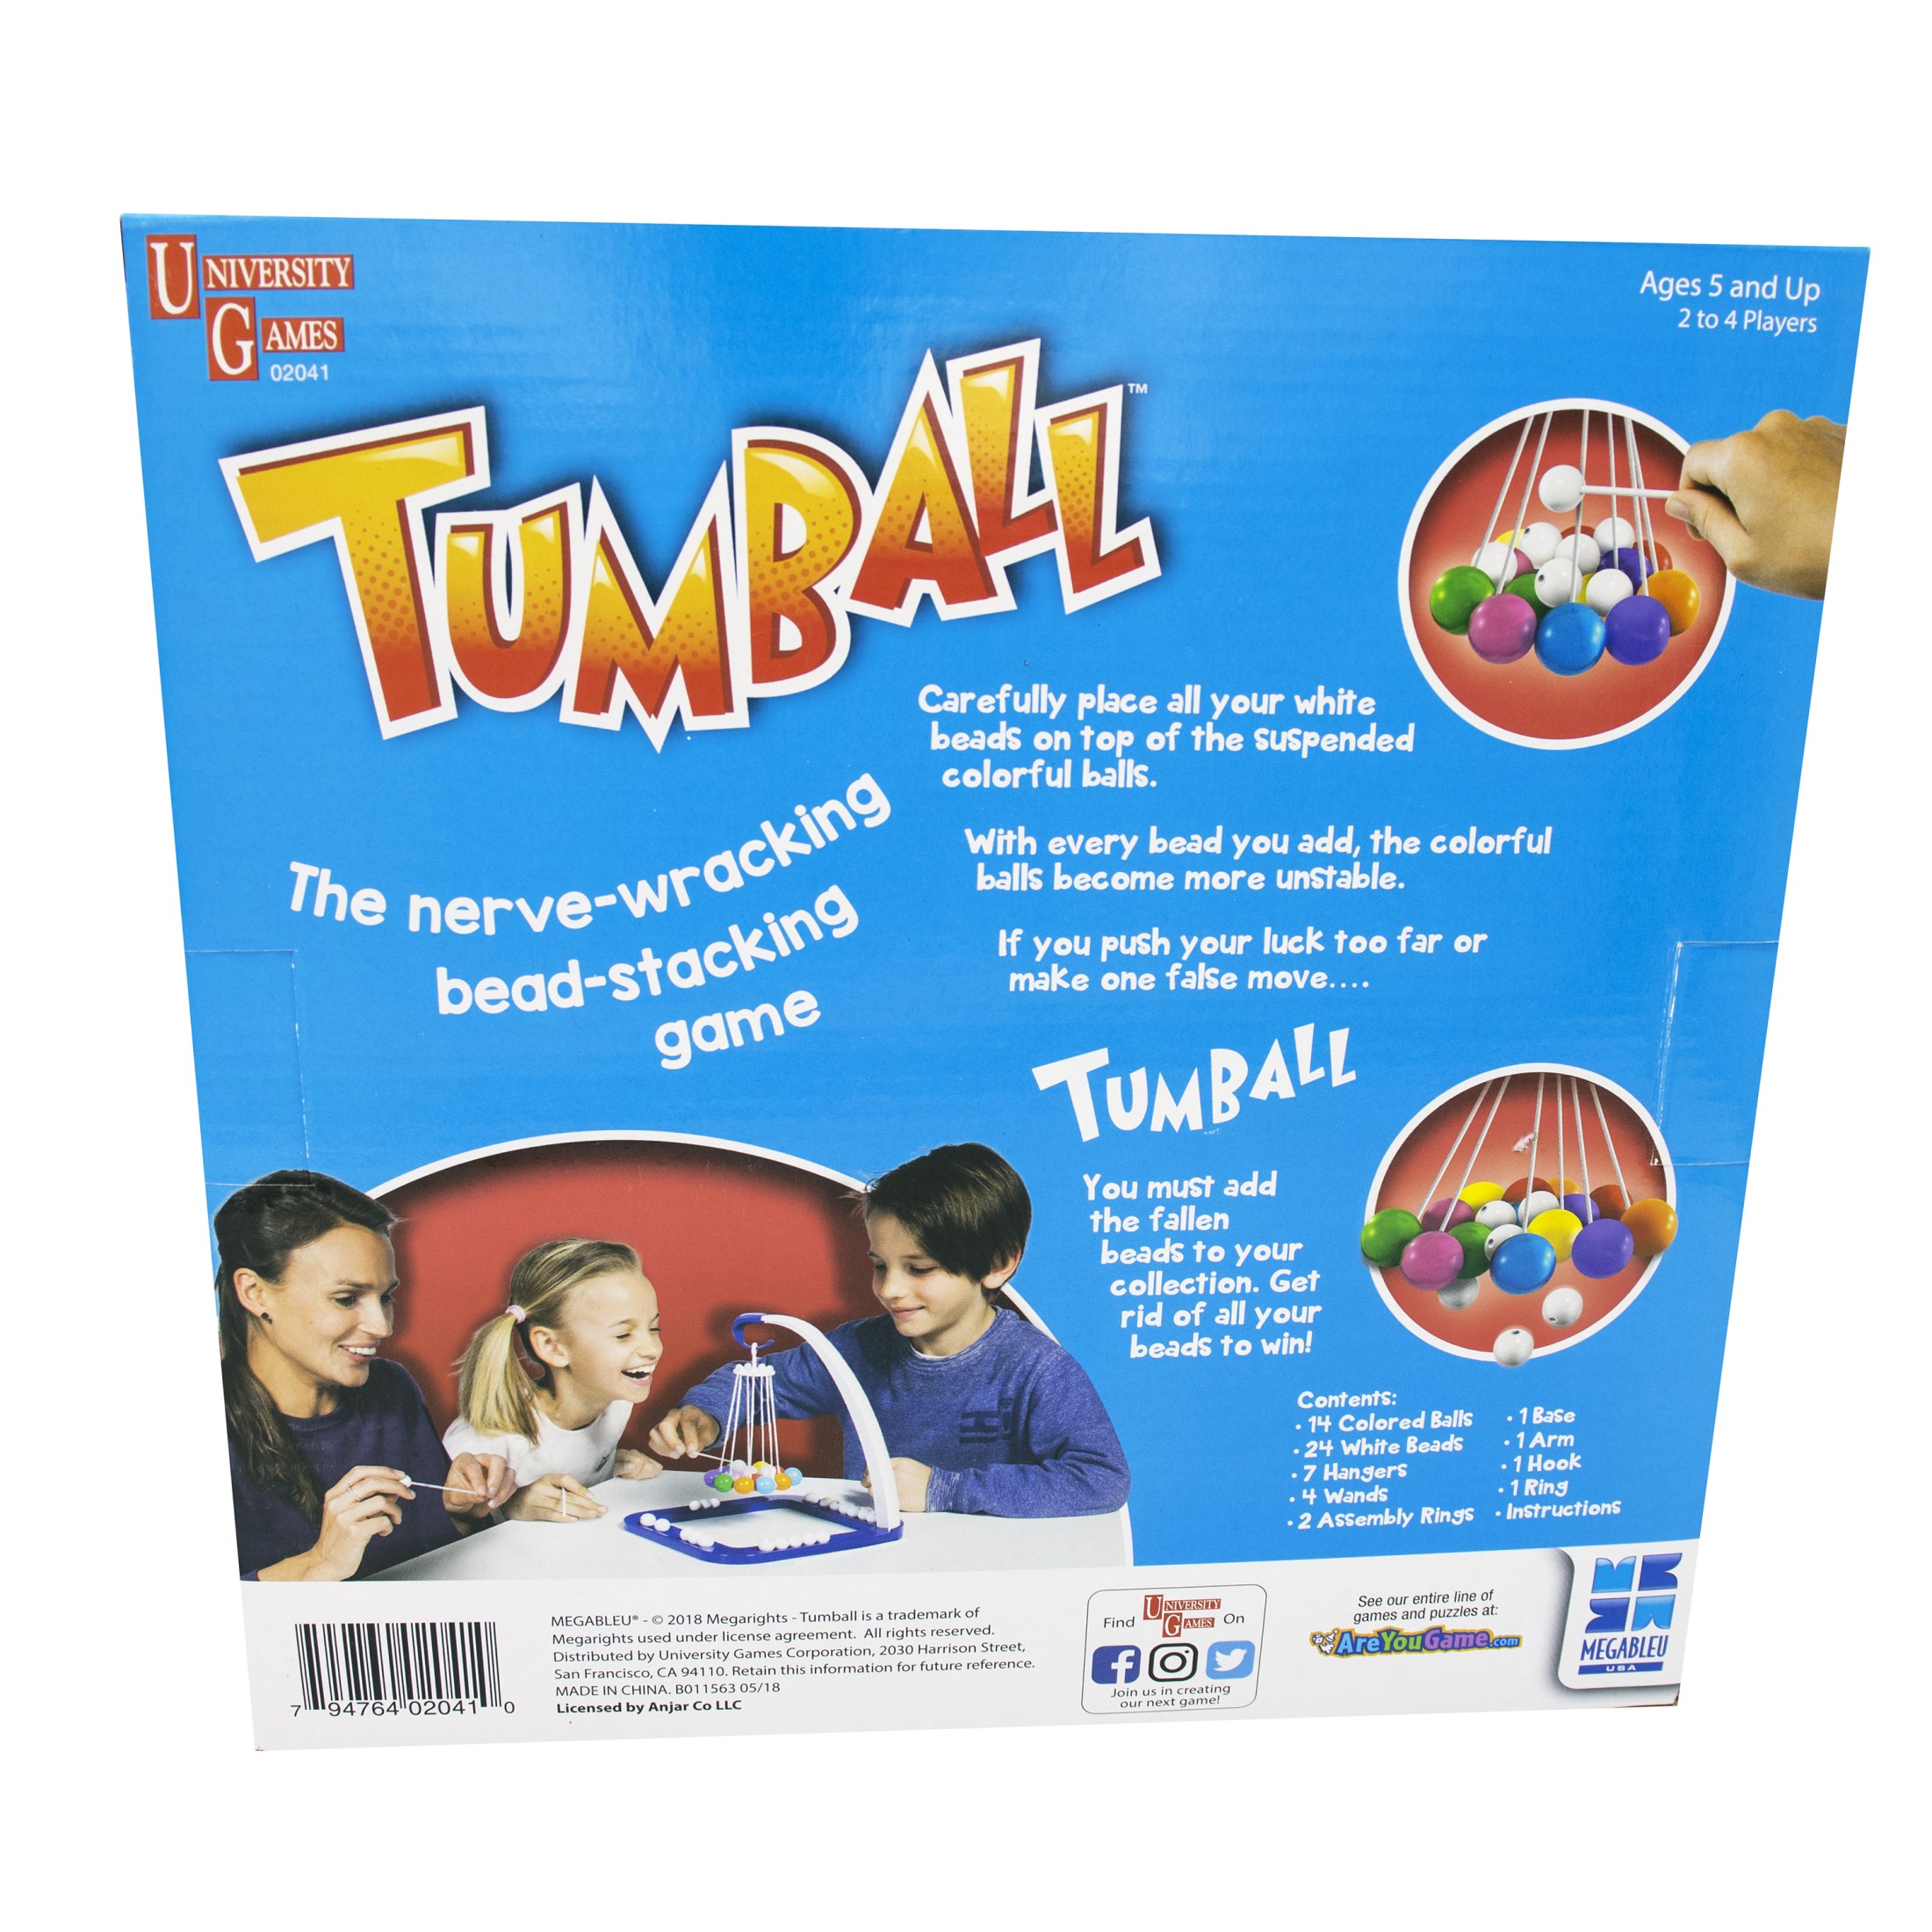 Megableu USA | Tumball Children's Bead Stacking Game for Ages 6 and Up and 2 to 4 Players - image 3 of 6